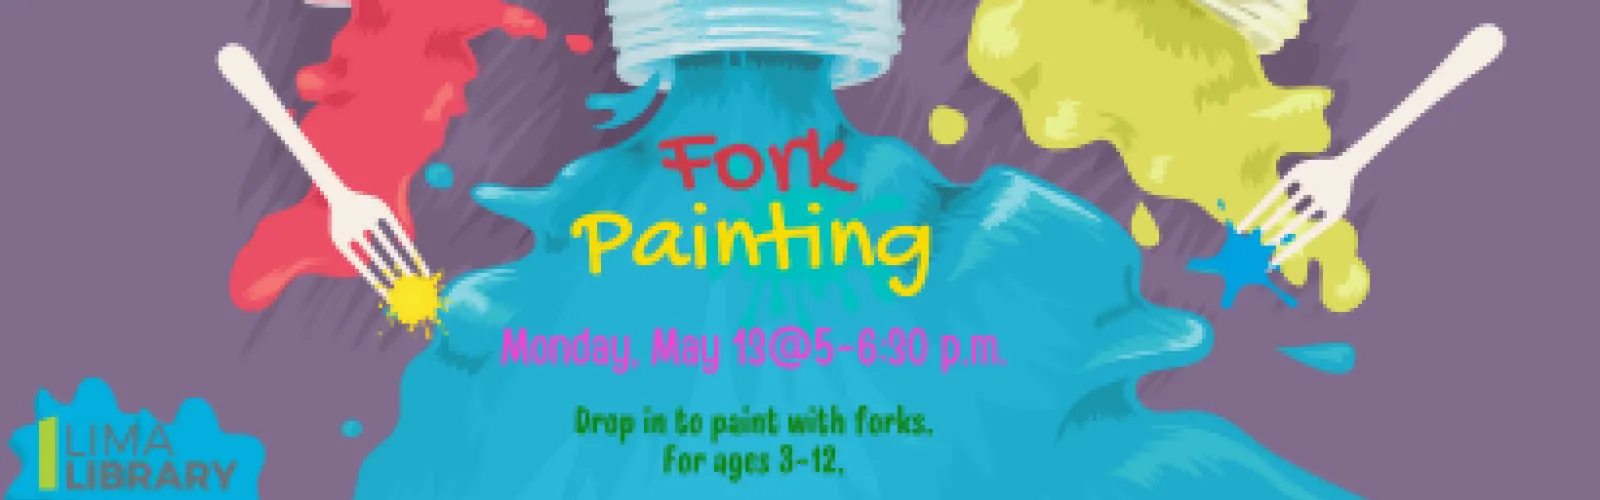 Fork Painting Flyer Image